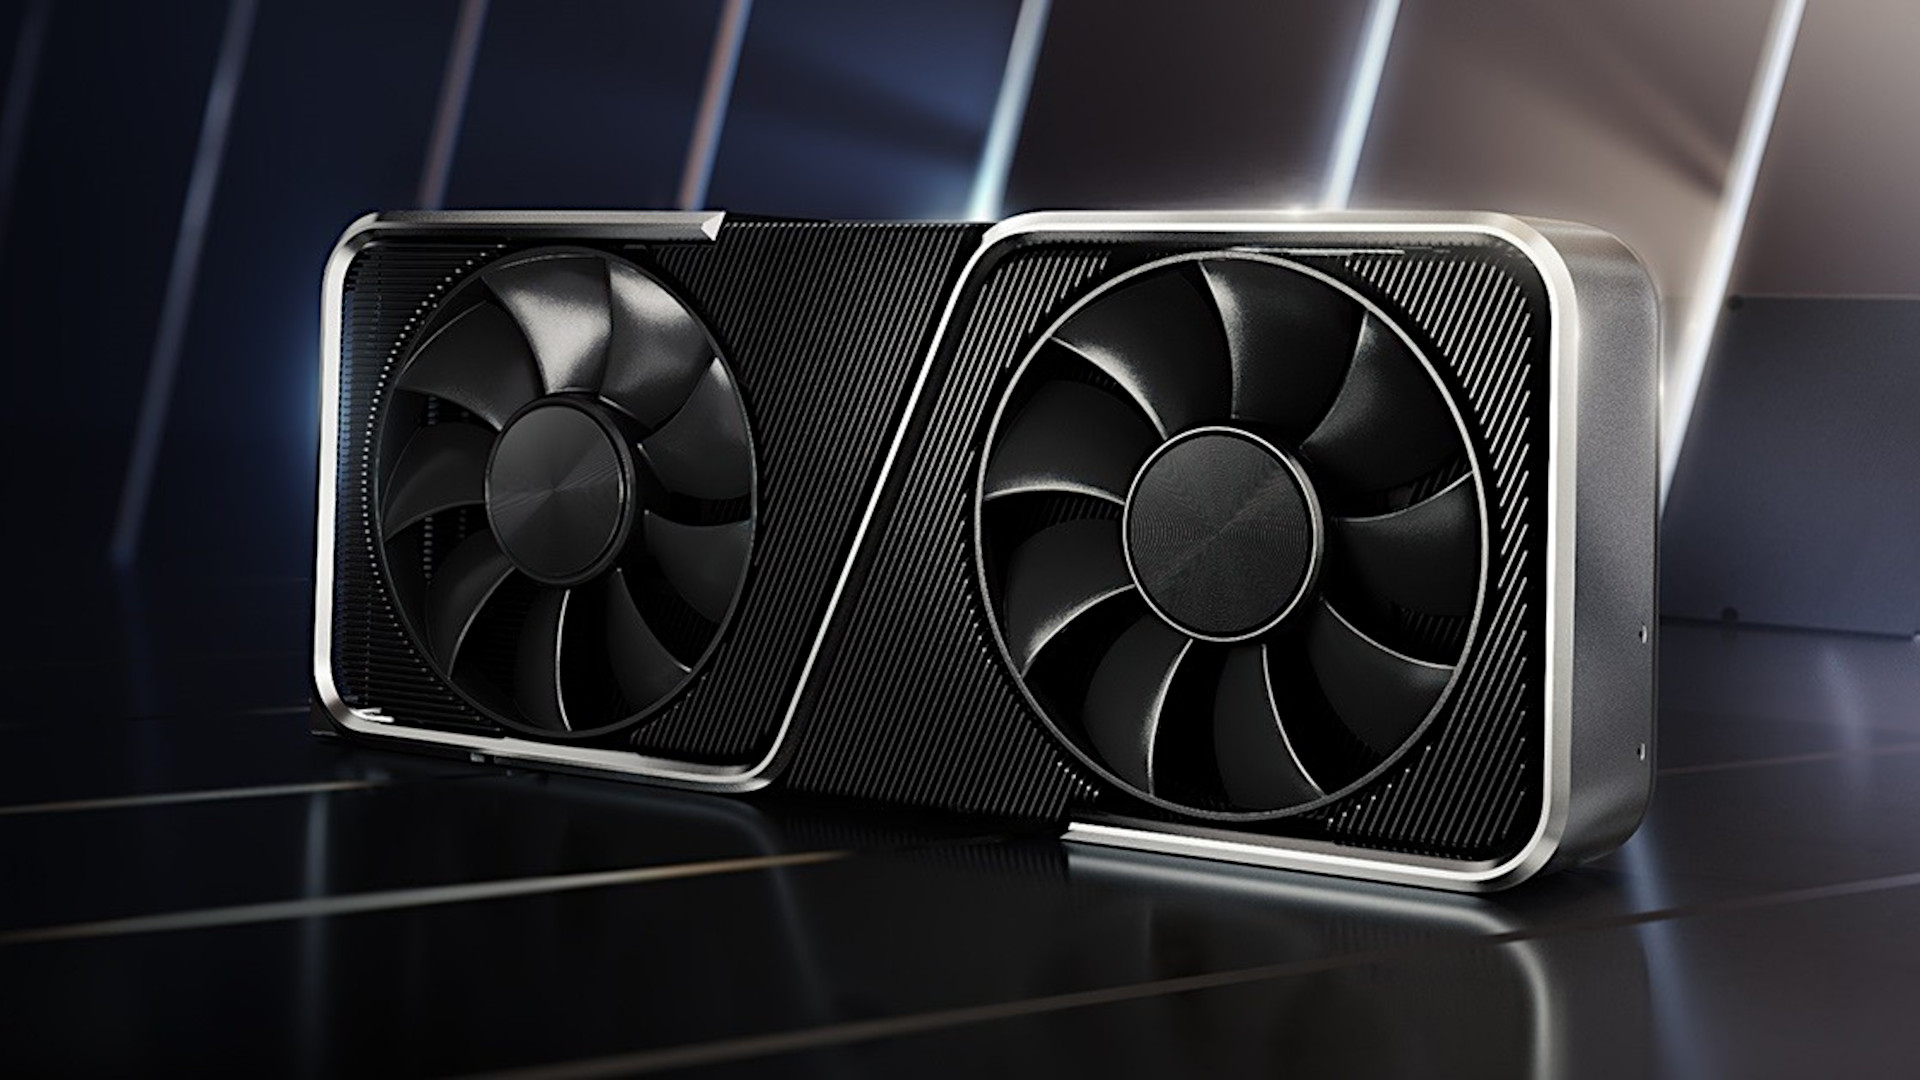 Nvidia RTX 4060 Ti launch could see RTX 3060 Ti price fall by $100